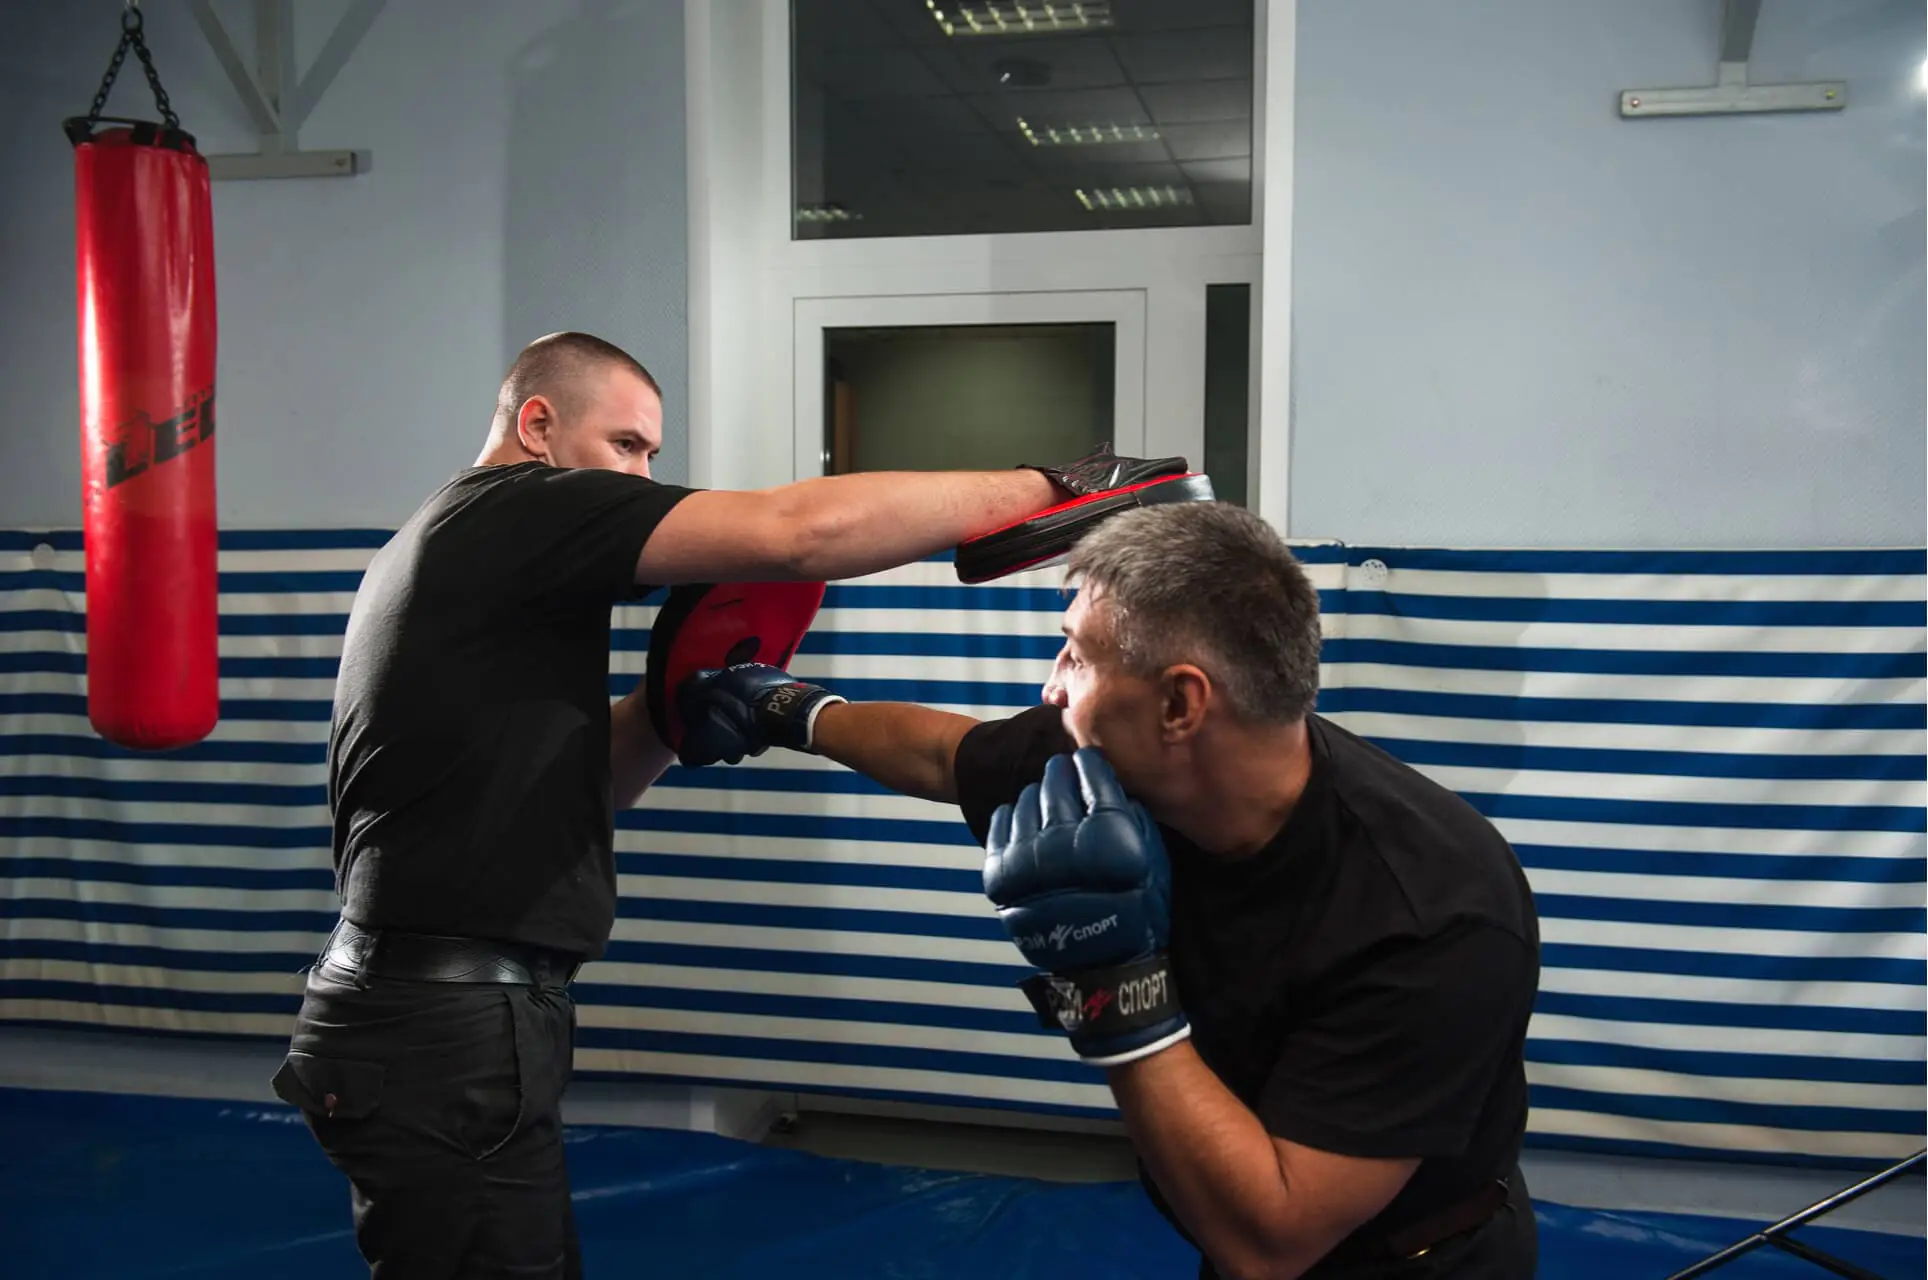 Professional Self-Defense Training At School Name In City, State